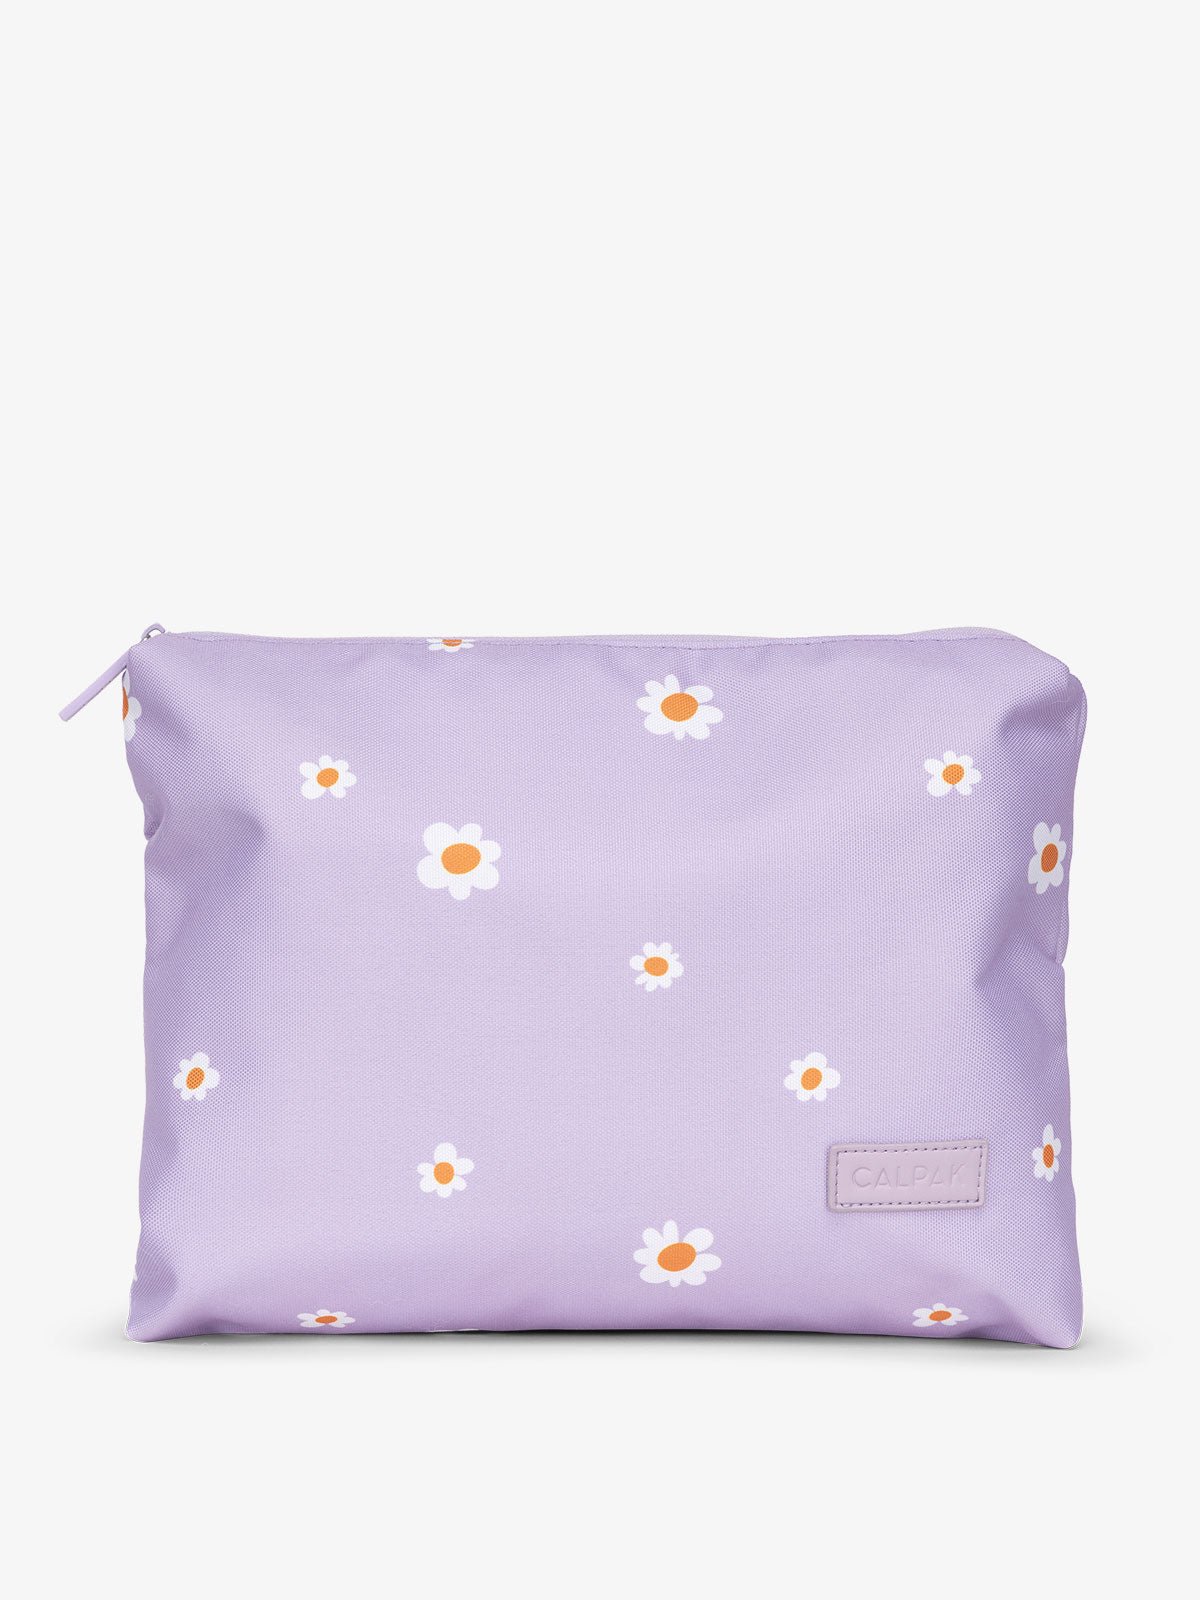 CALPAK water-resistant travel pouch for luggage in orchid fields